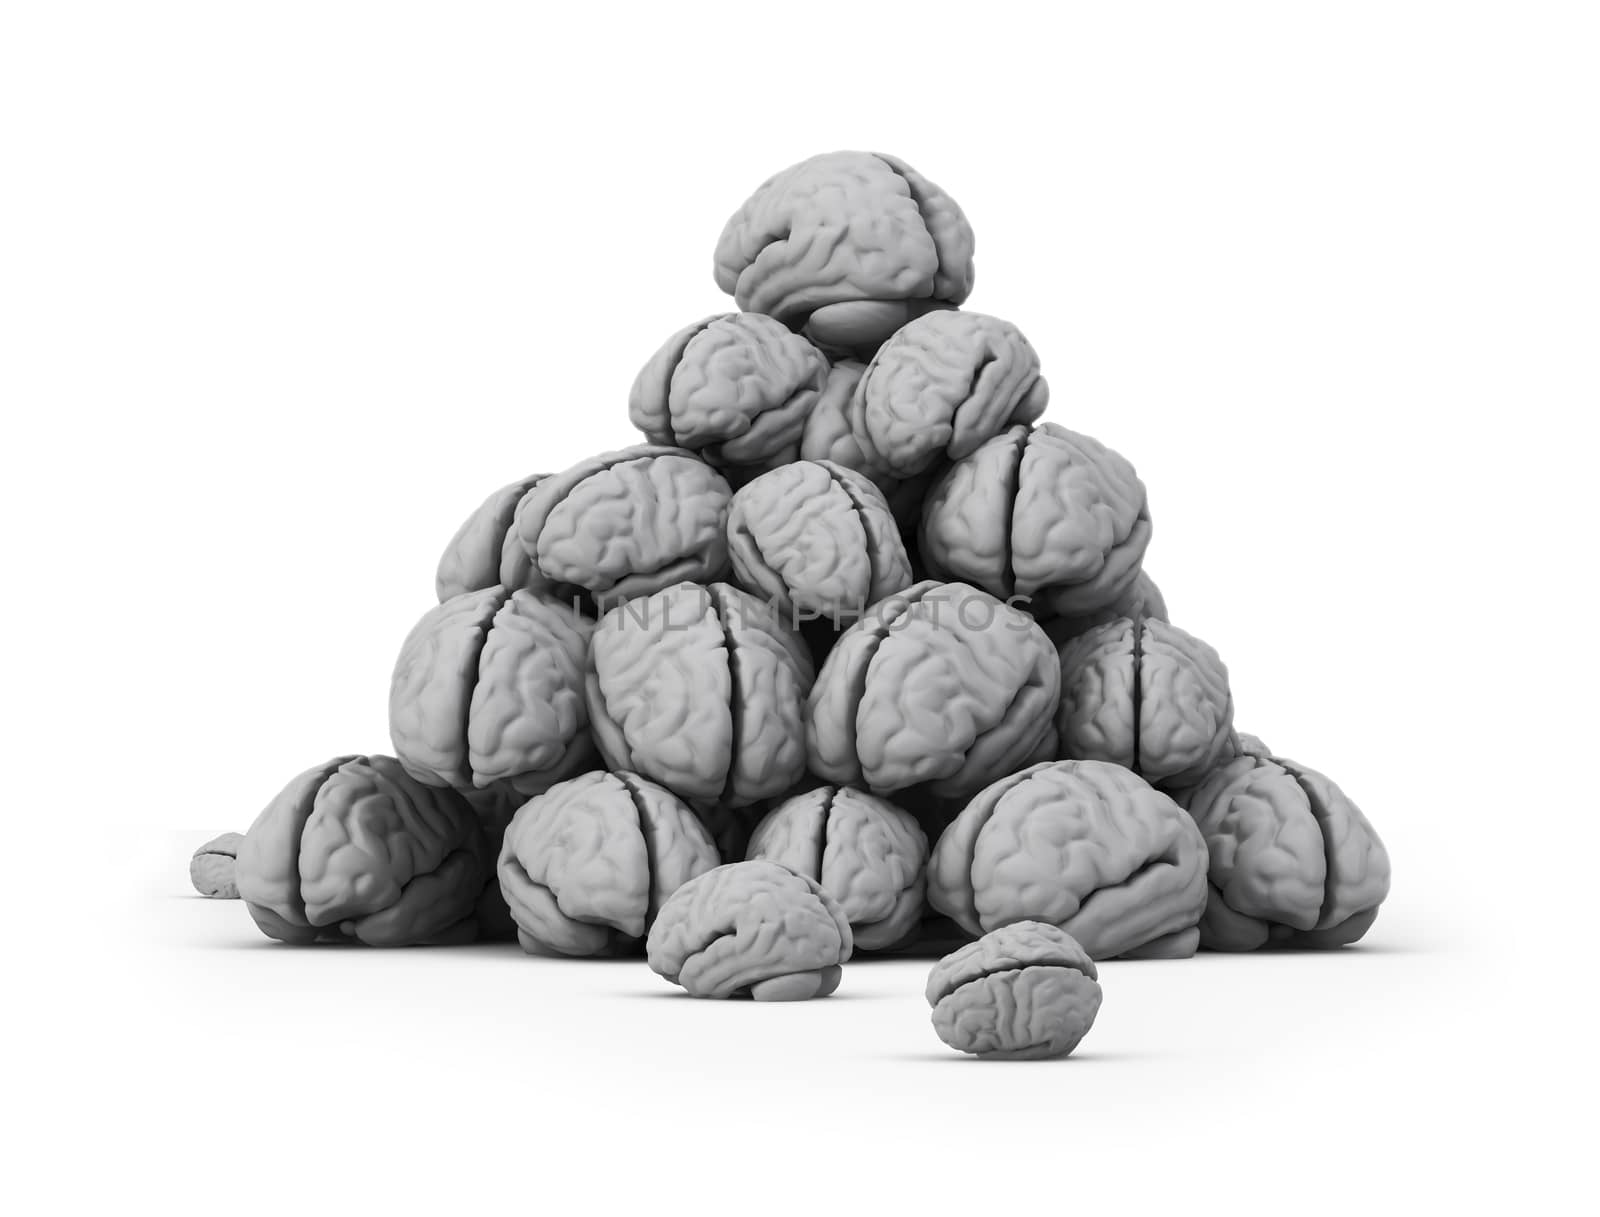 The big dump of brains on the isolated white background